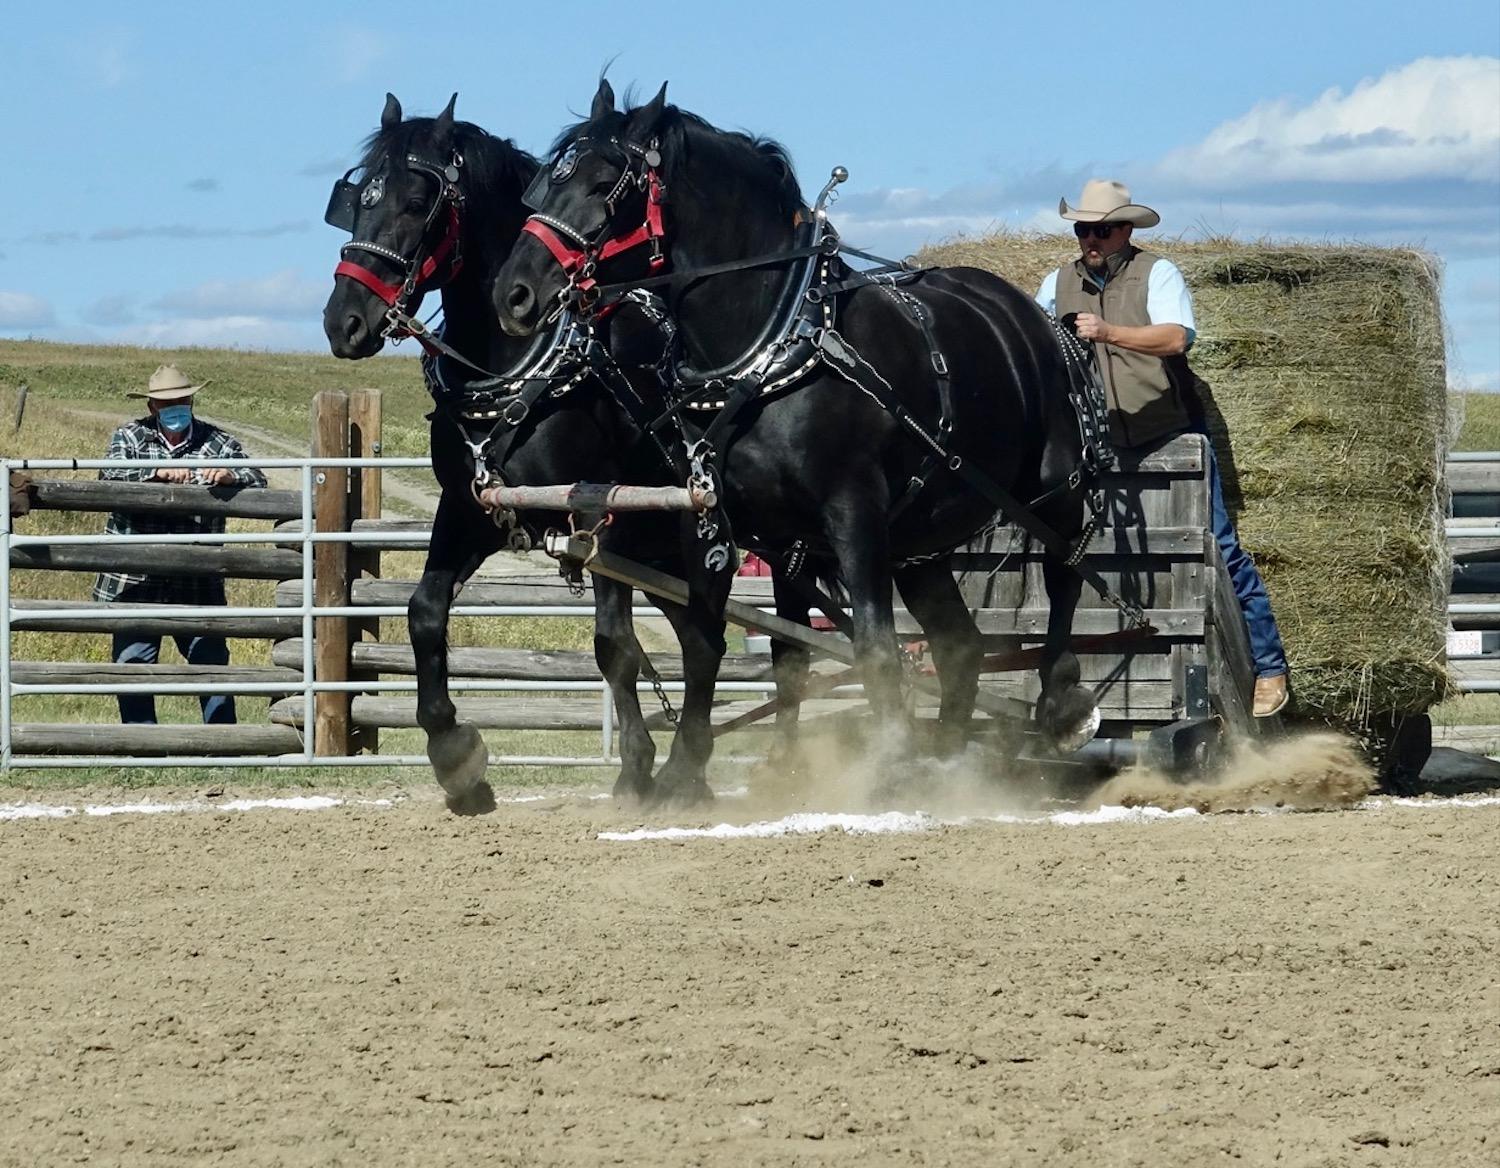 A team of Percherons pulls a hay bale during a chore horse competition at Bar U Ranch.